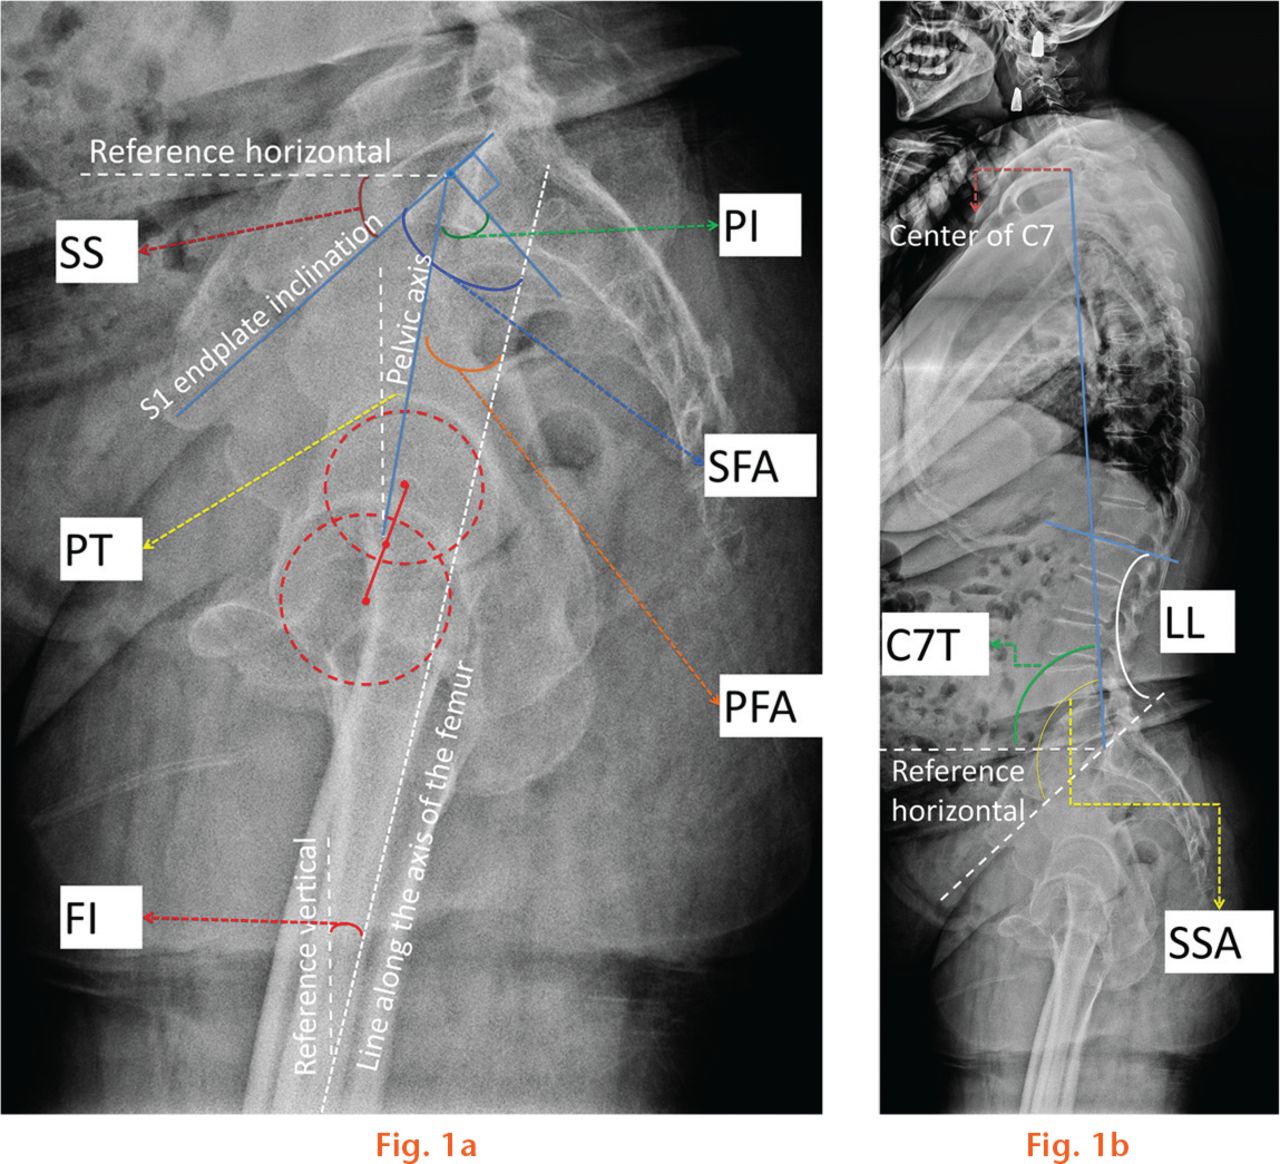  
            Illustration of the radiographic parameters of the sagittal alignment of the spine, pelvis and hip: a) parameters of the pelvis and hip joint. PI, pelvic incidence; PT, pelvic tilt; SS, sacral slope; PFA, pelvic femoral angle; SFA, sacrofemoral angle; FI, femoral inclination; b) parameters of the spine. LL, lumbar lordosis; C7T, C7 tilt; SSA, spinosacral angle.
          